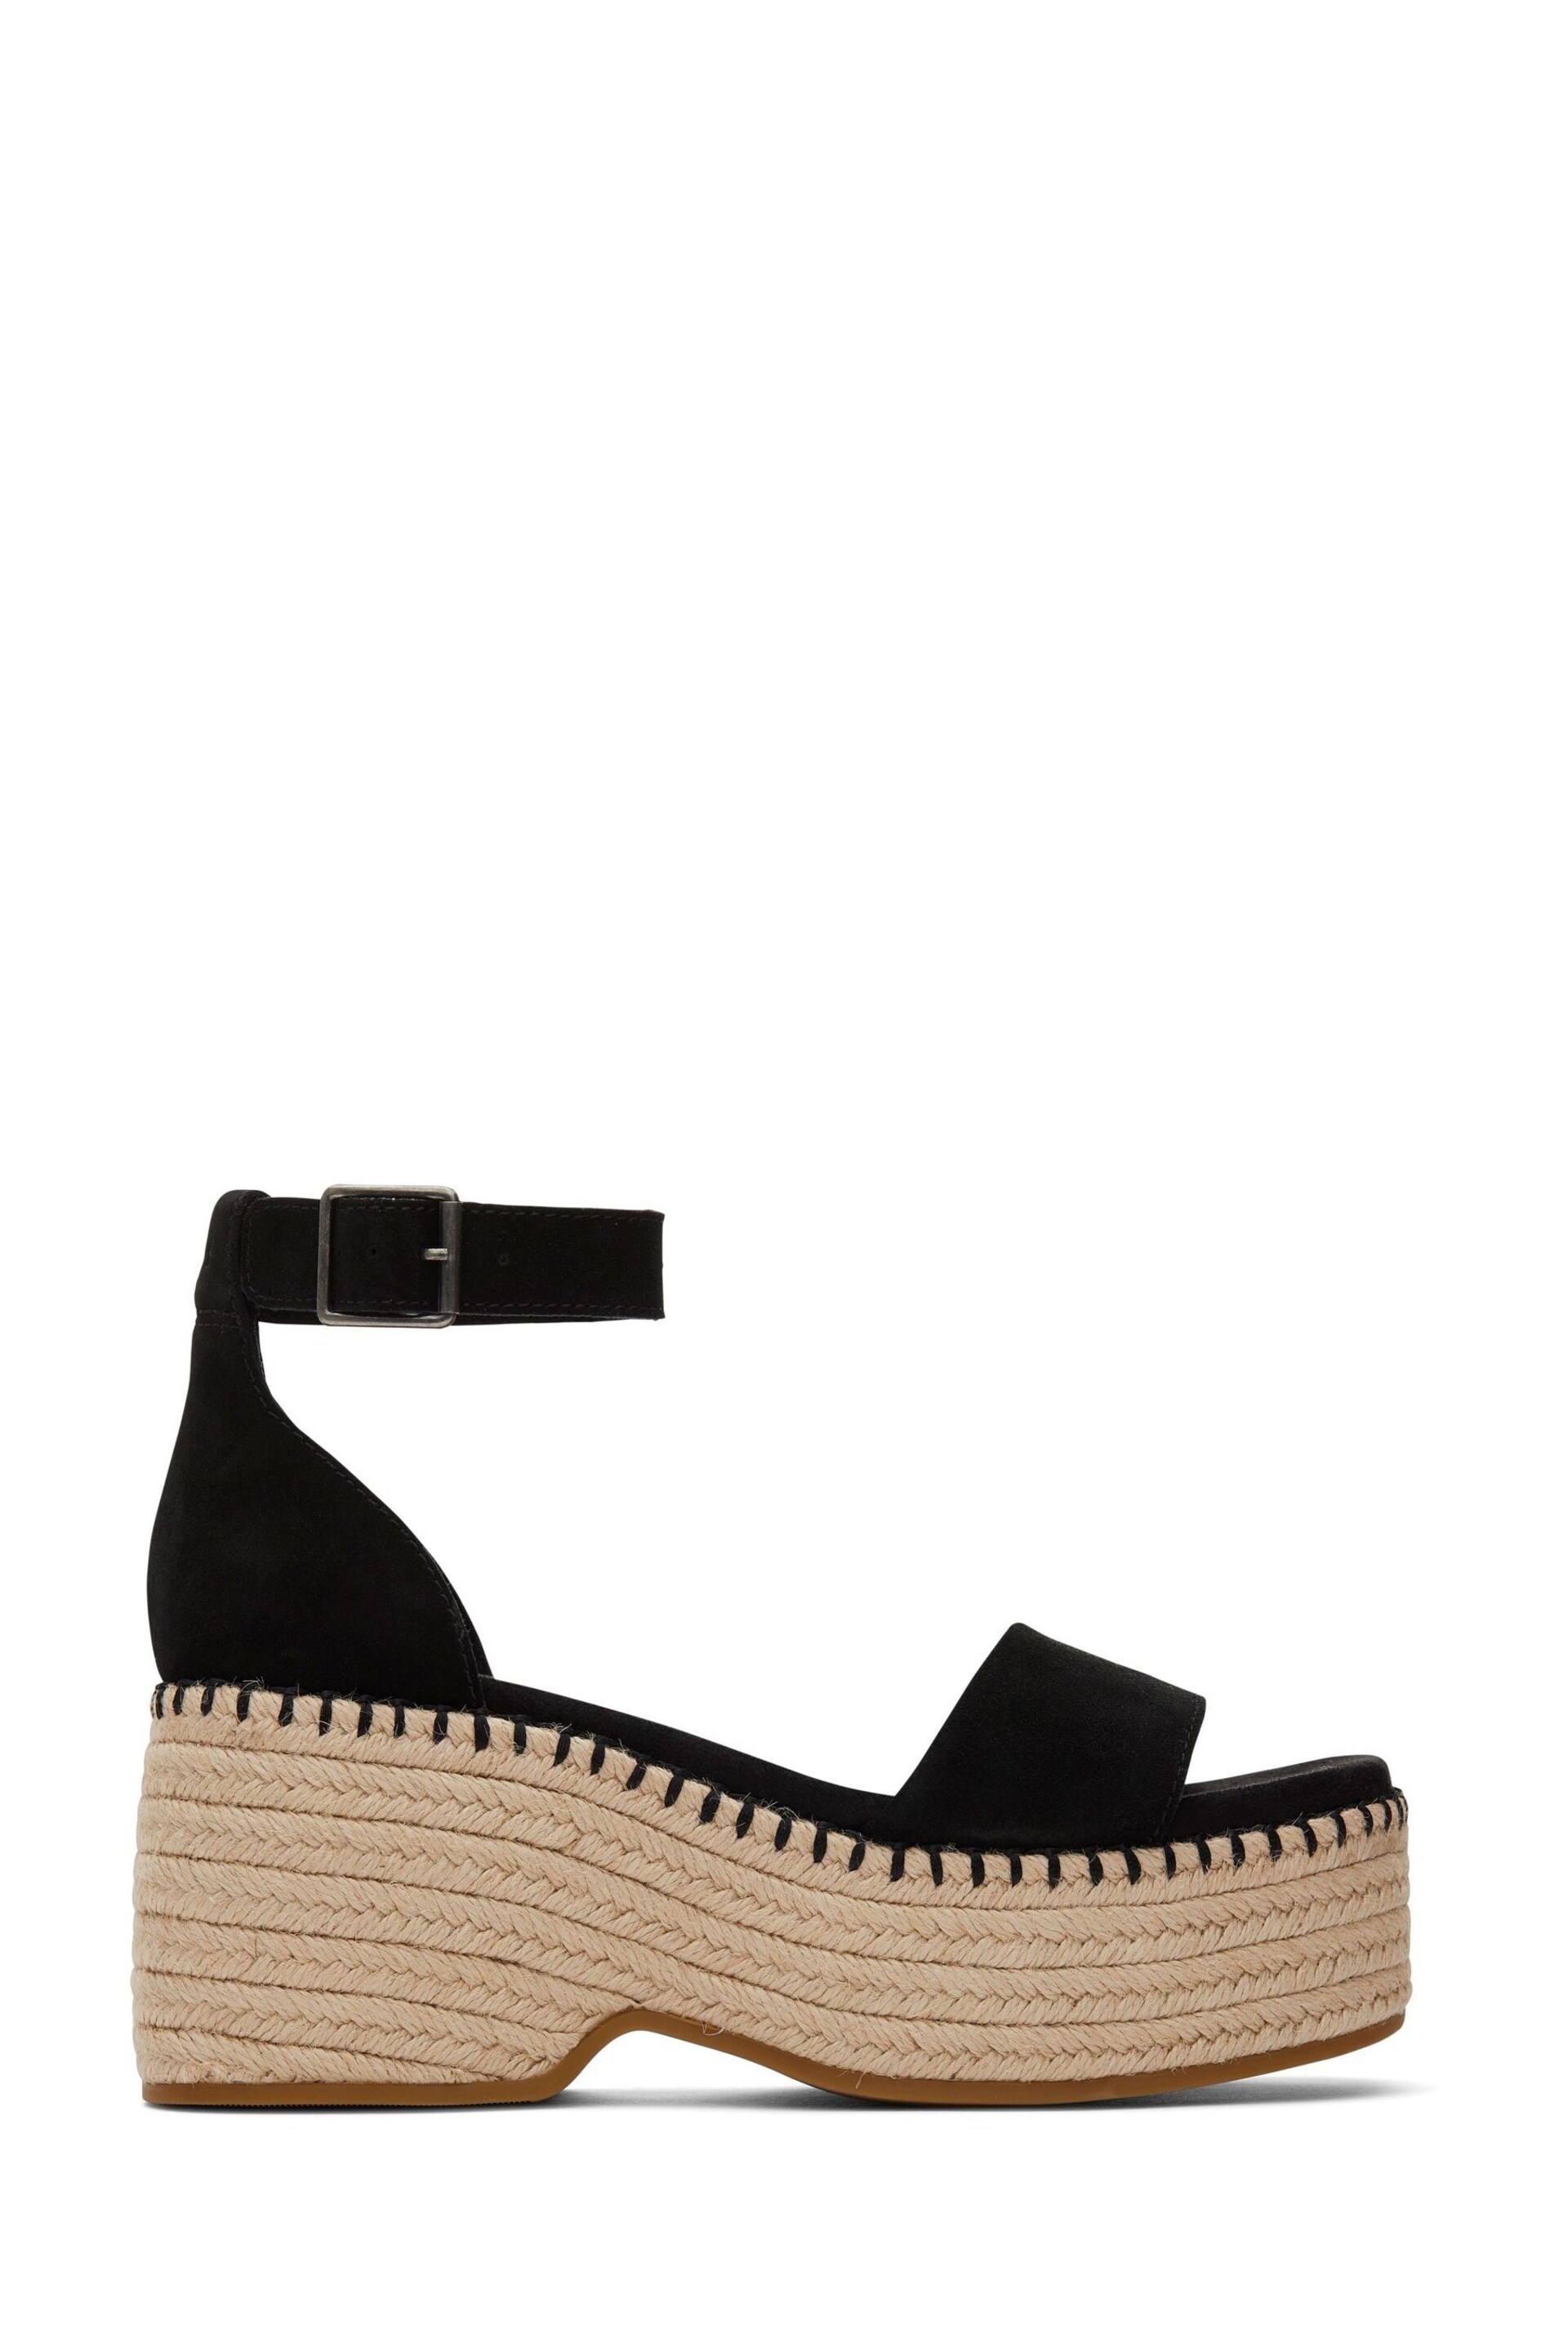 Toms Laila Black Sandals In Suede - Image 1 of 5